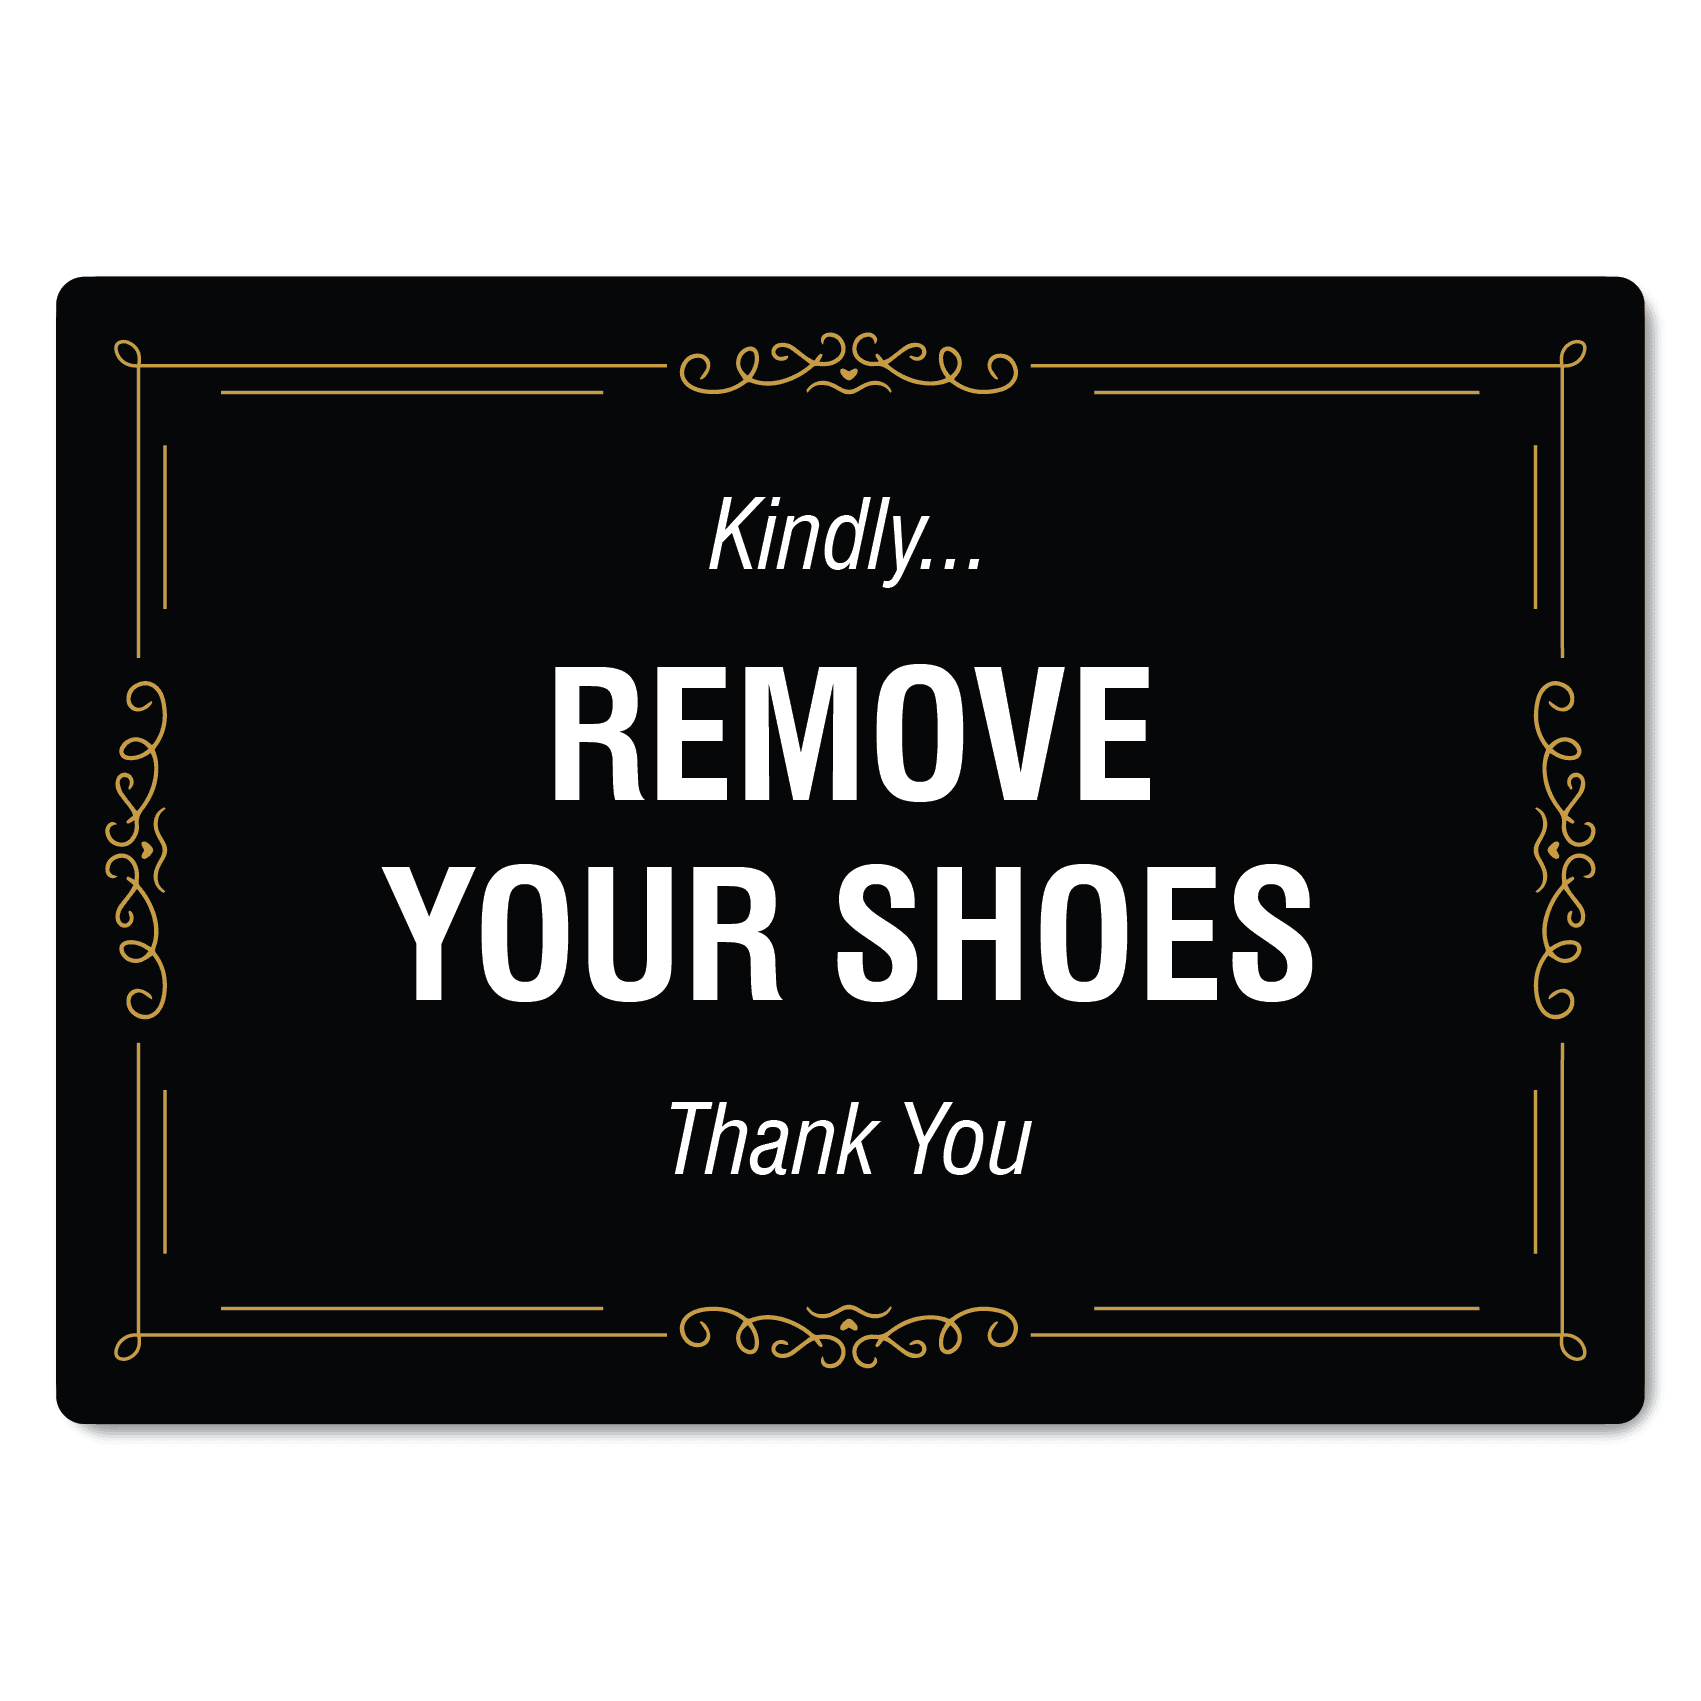 Kindly Remove Your Shoes Sign - The Signmaker